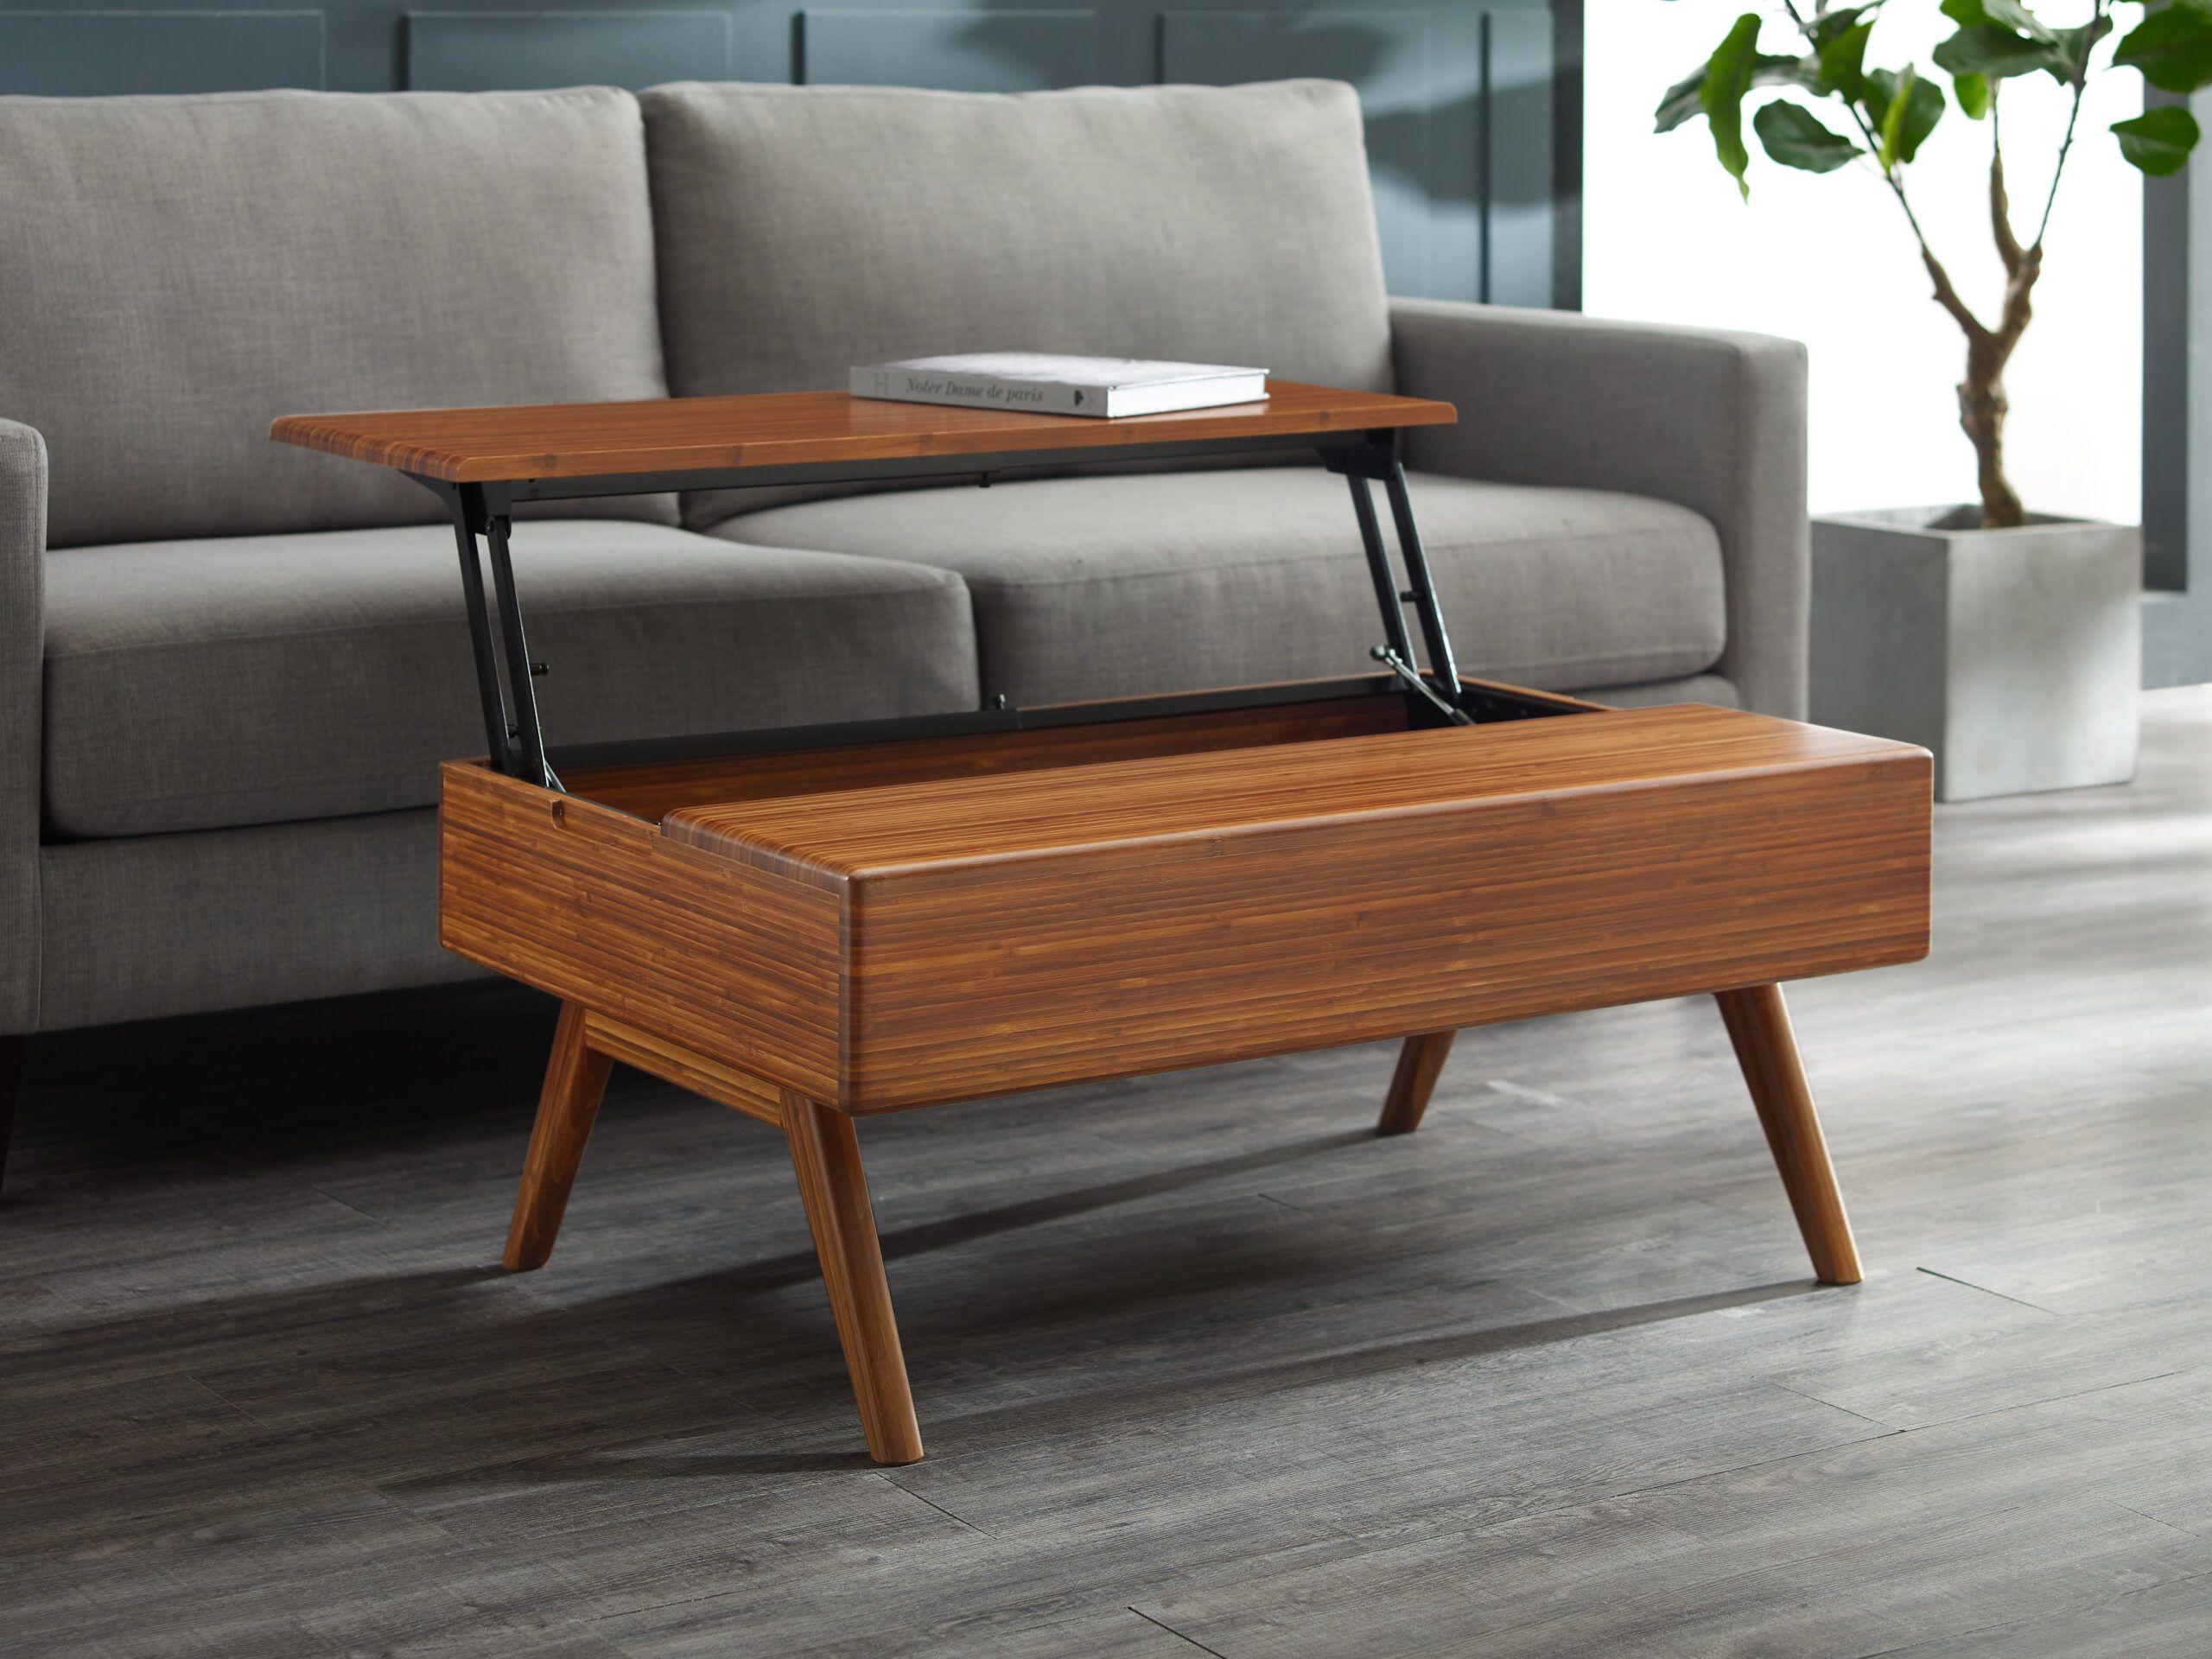 Rhody Lift Top Coffee Table | Greenington | Bedrooms & More Throughout Lift Top Coffee Tables (View 5 of 15)